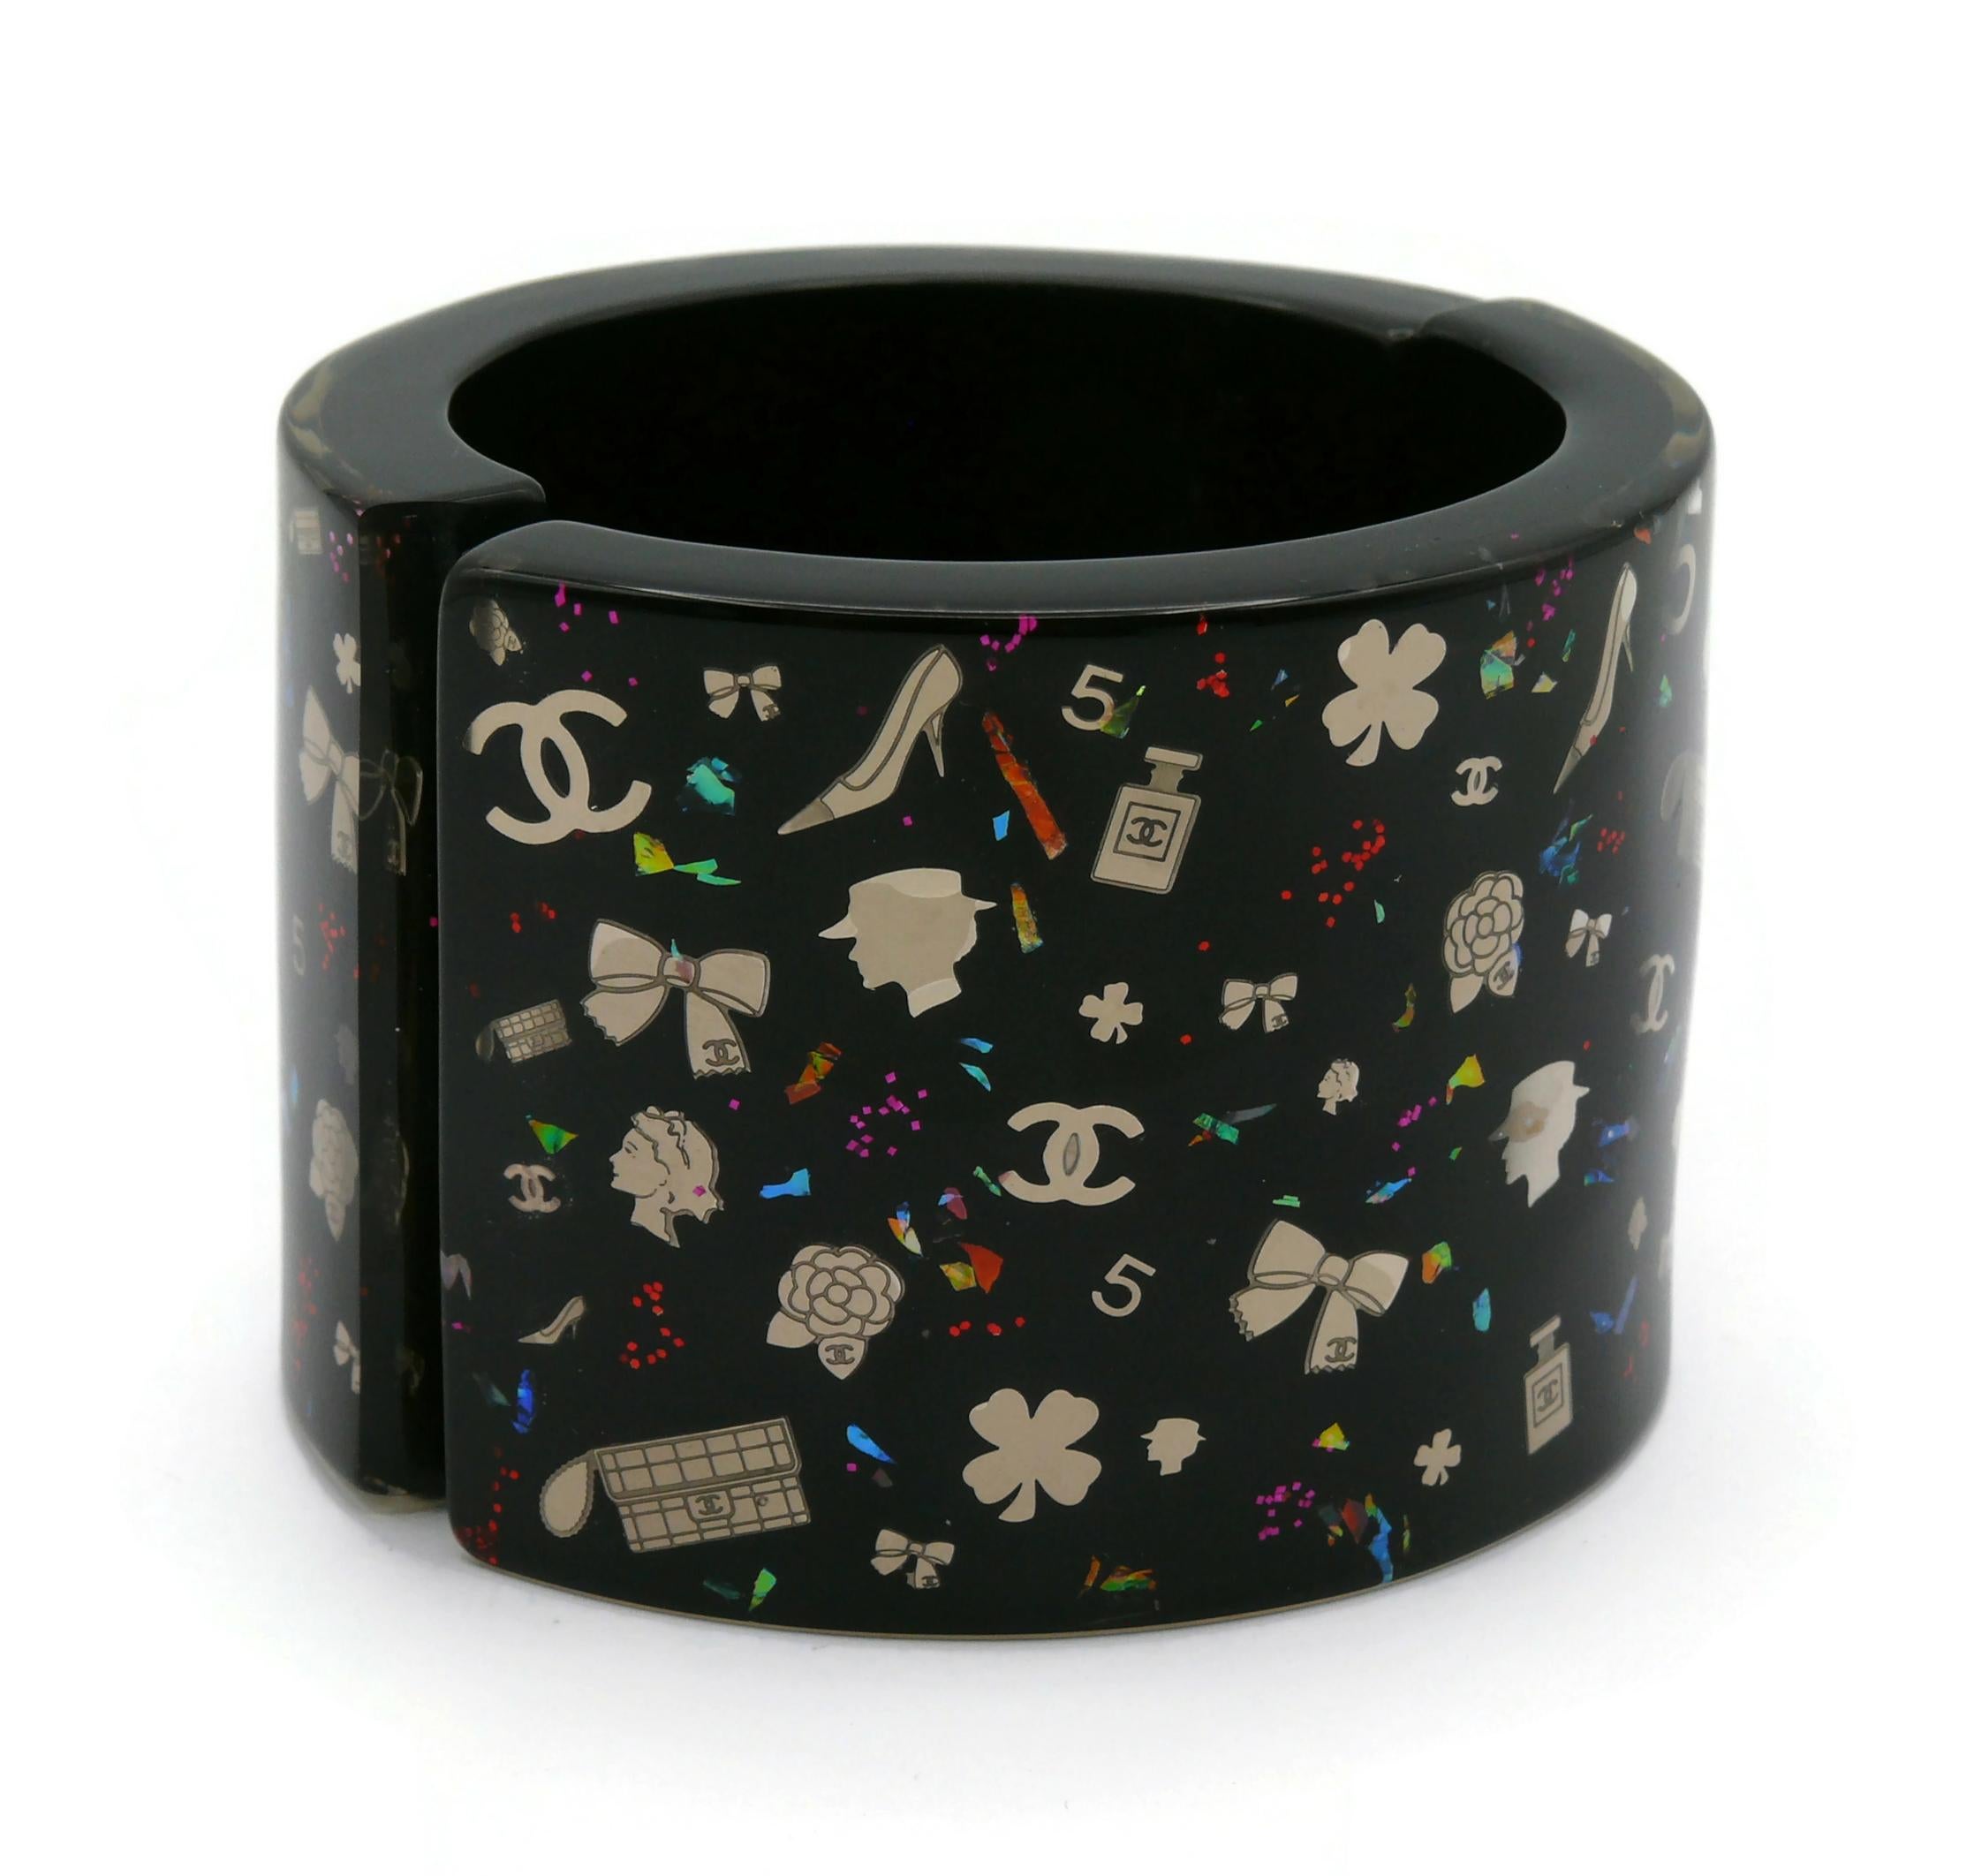 CHANEL by KARL LAGERFELD Iconic Symbols Black Cuff Bracelet, Fall 2006 For Sale 3